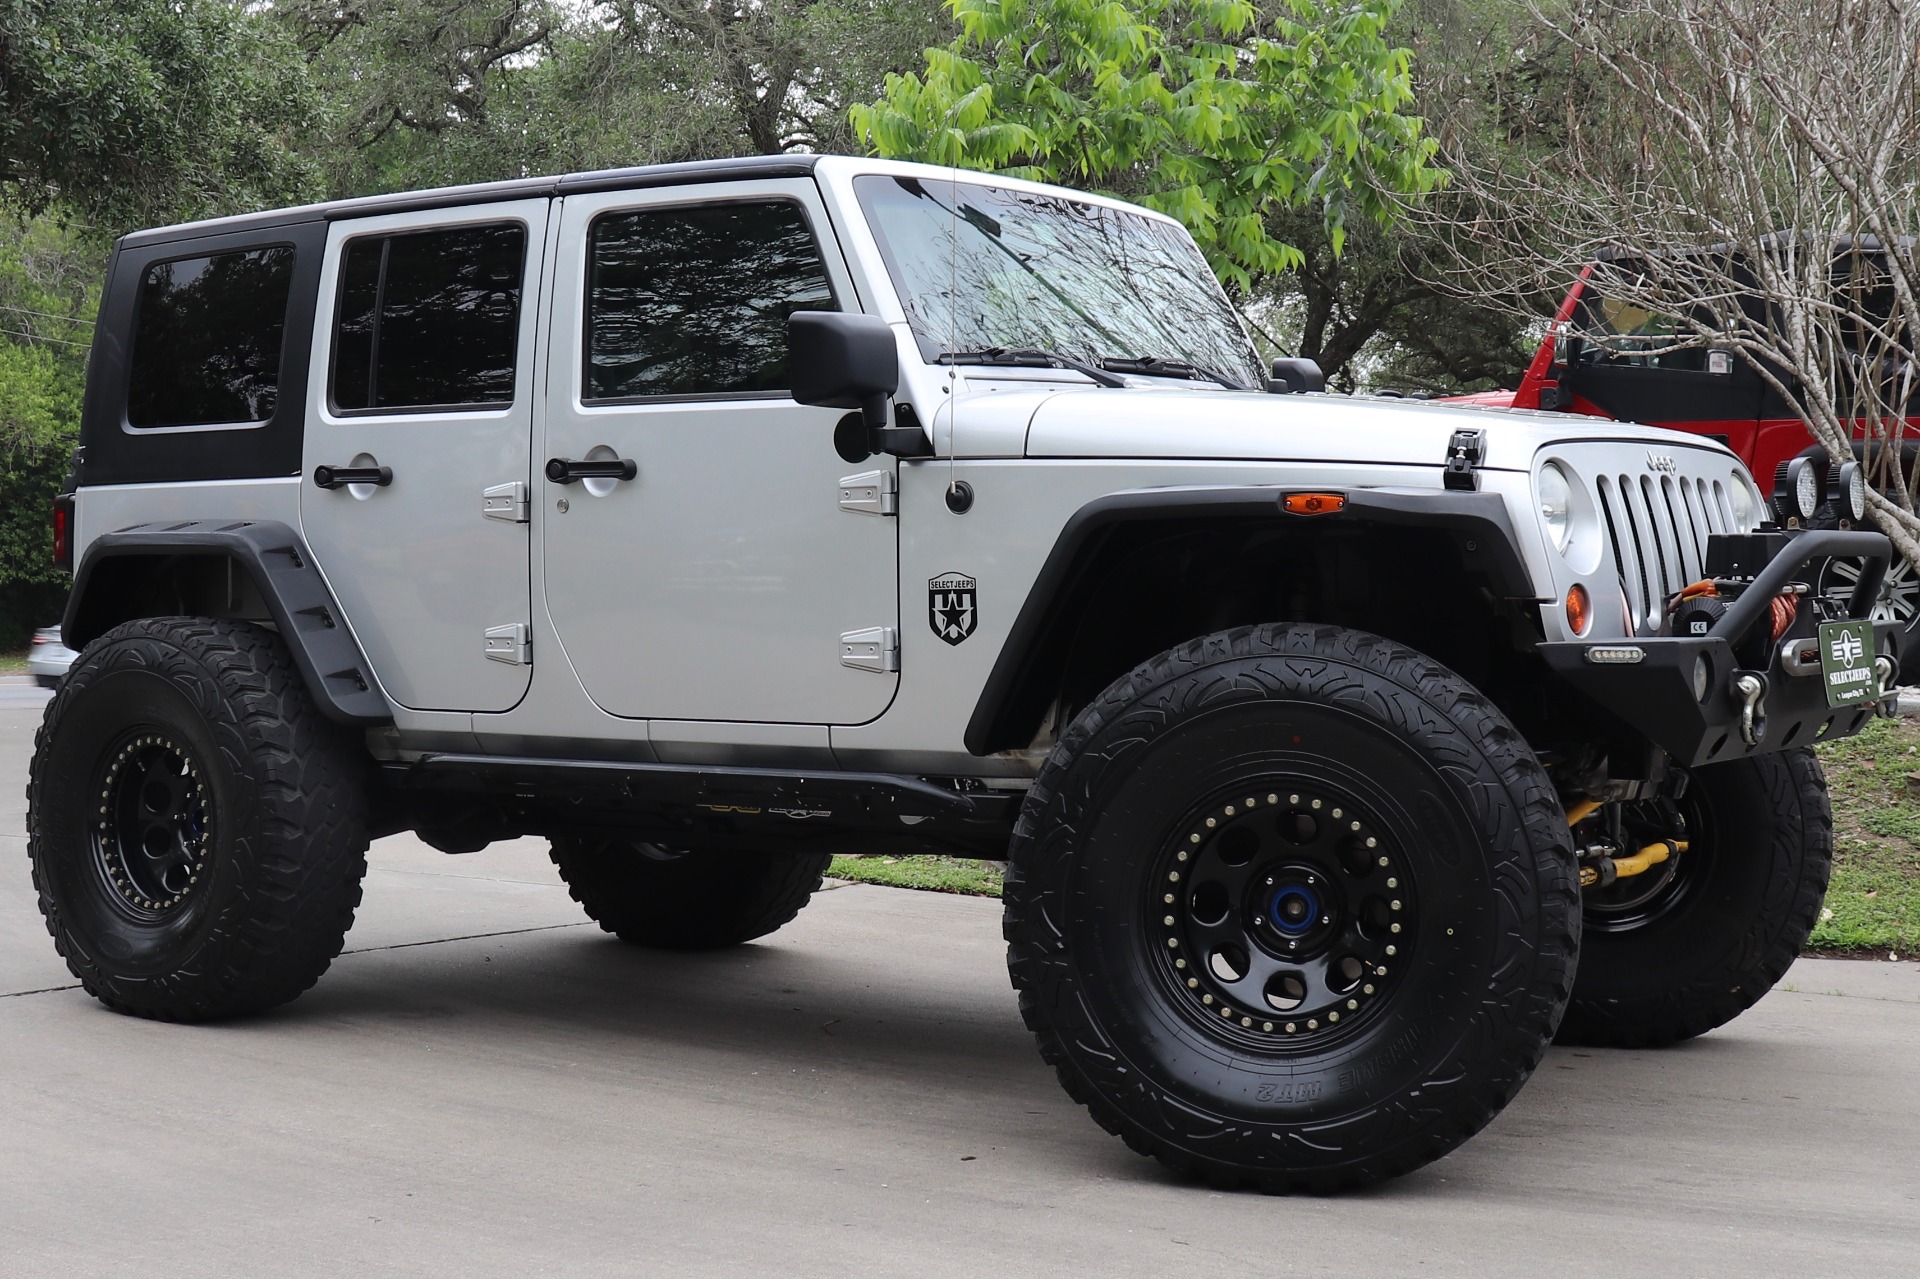 Used 2008 Jeep Wrangler Unlimited Rubicon For Sale ($24,995) | Select Jeeps  Inc. Stock #615442